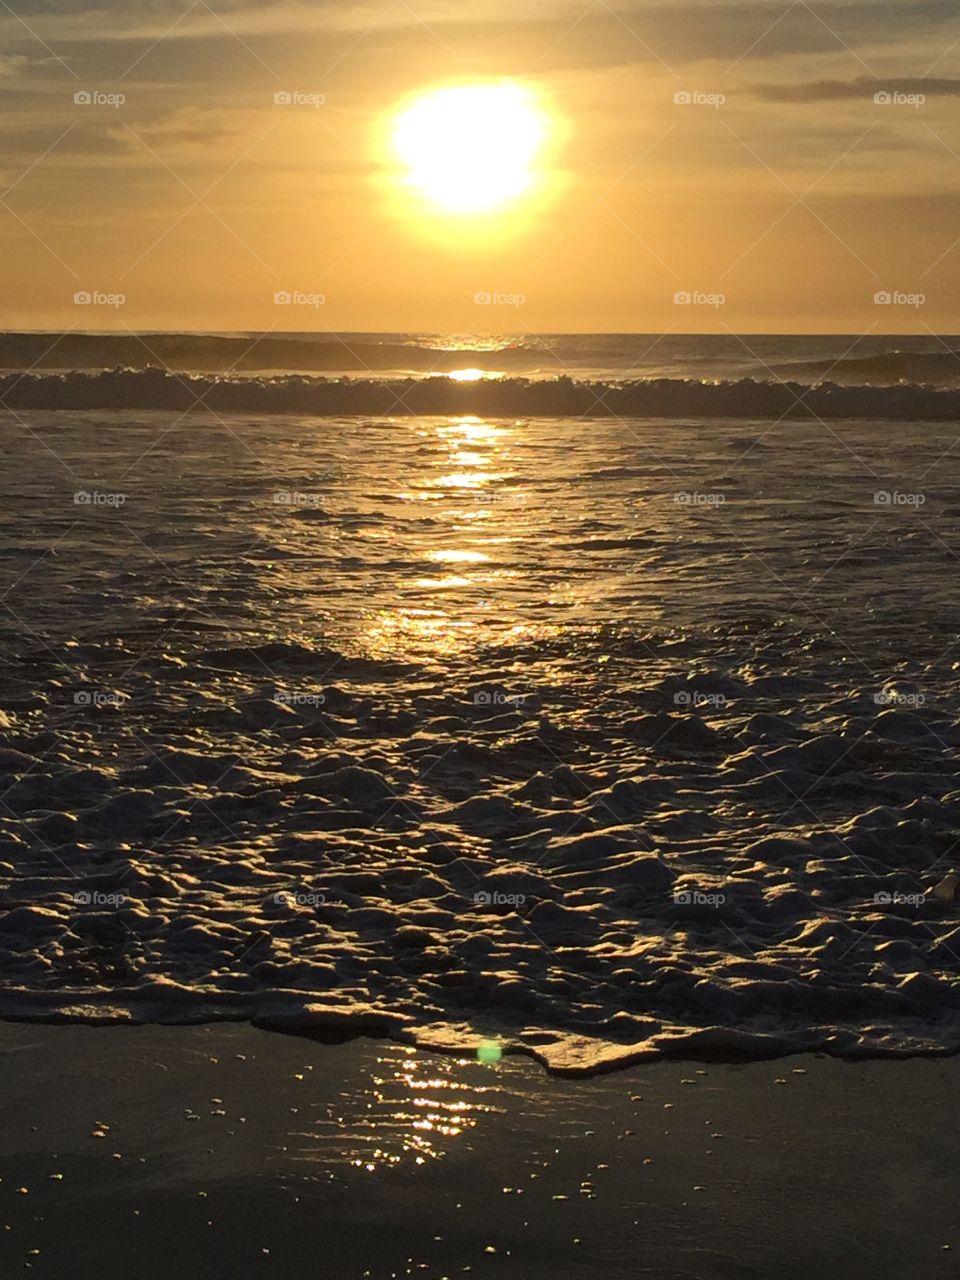 A golden sunset on a San Diego beach.  The waves splash as the light glimmers on the water